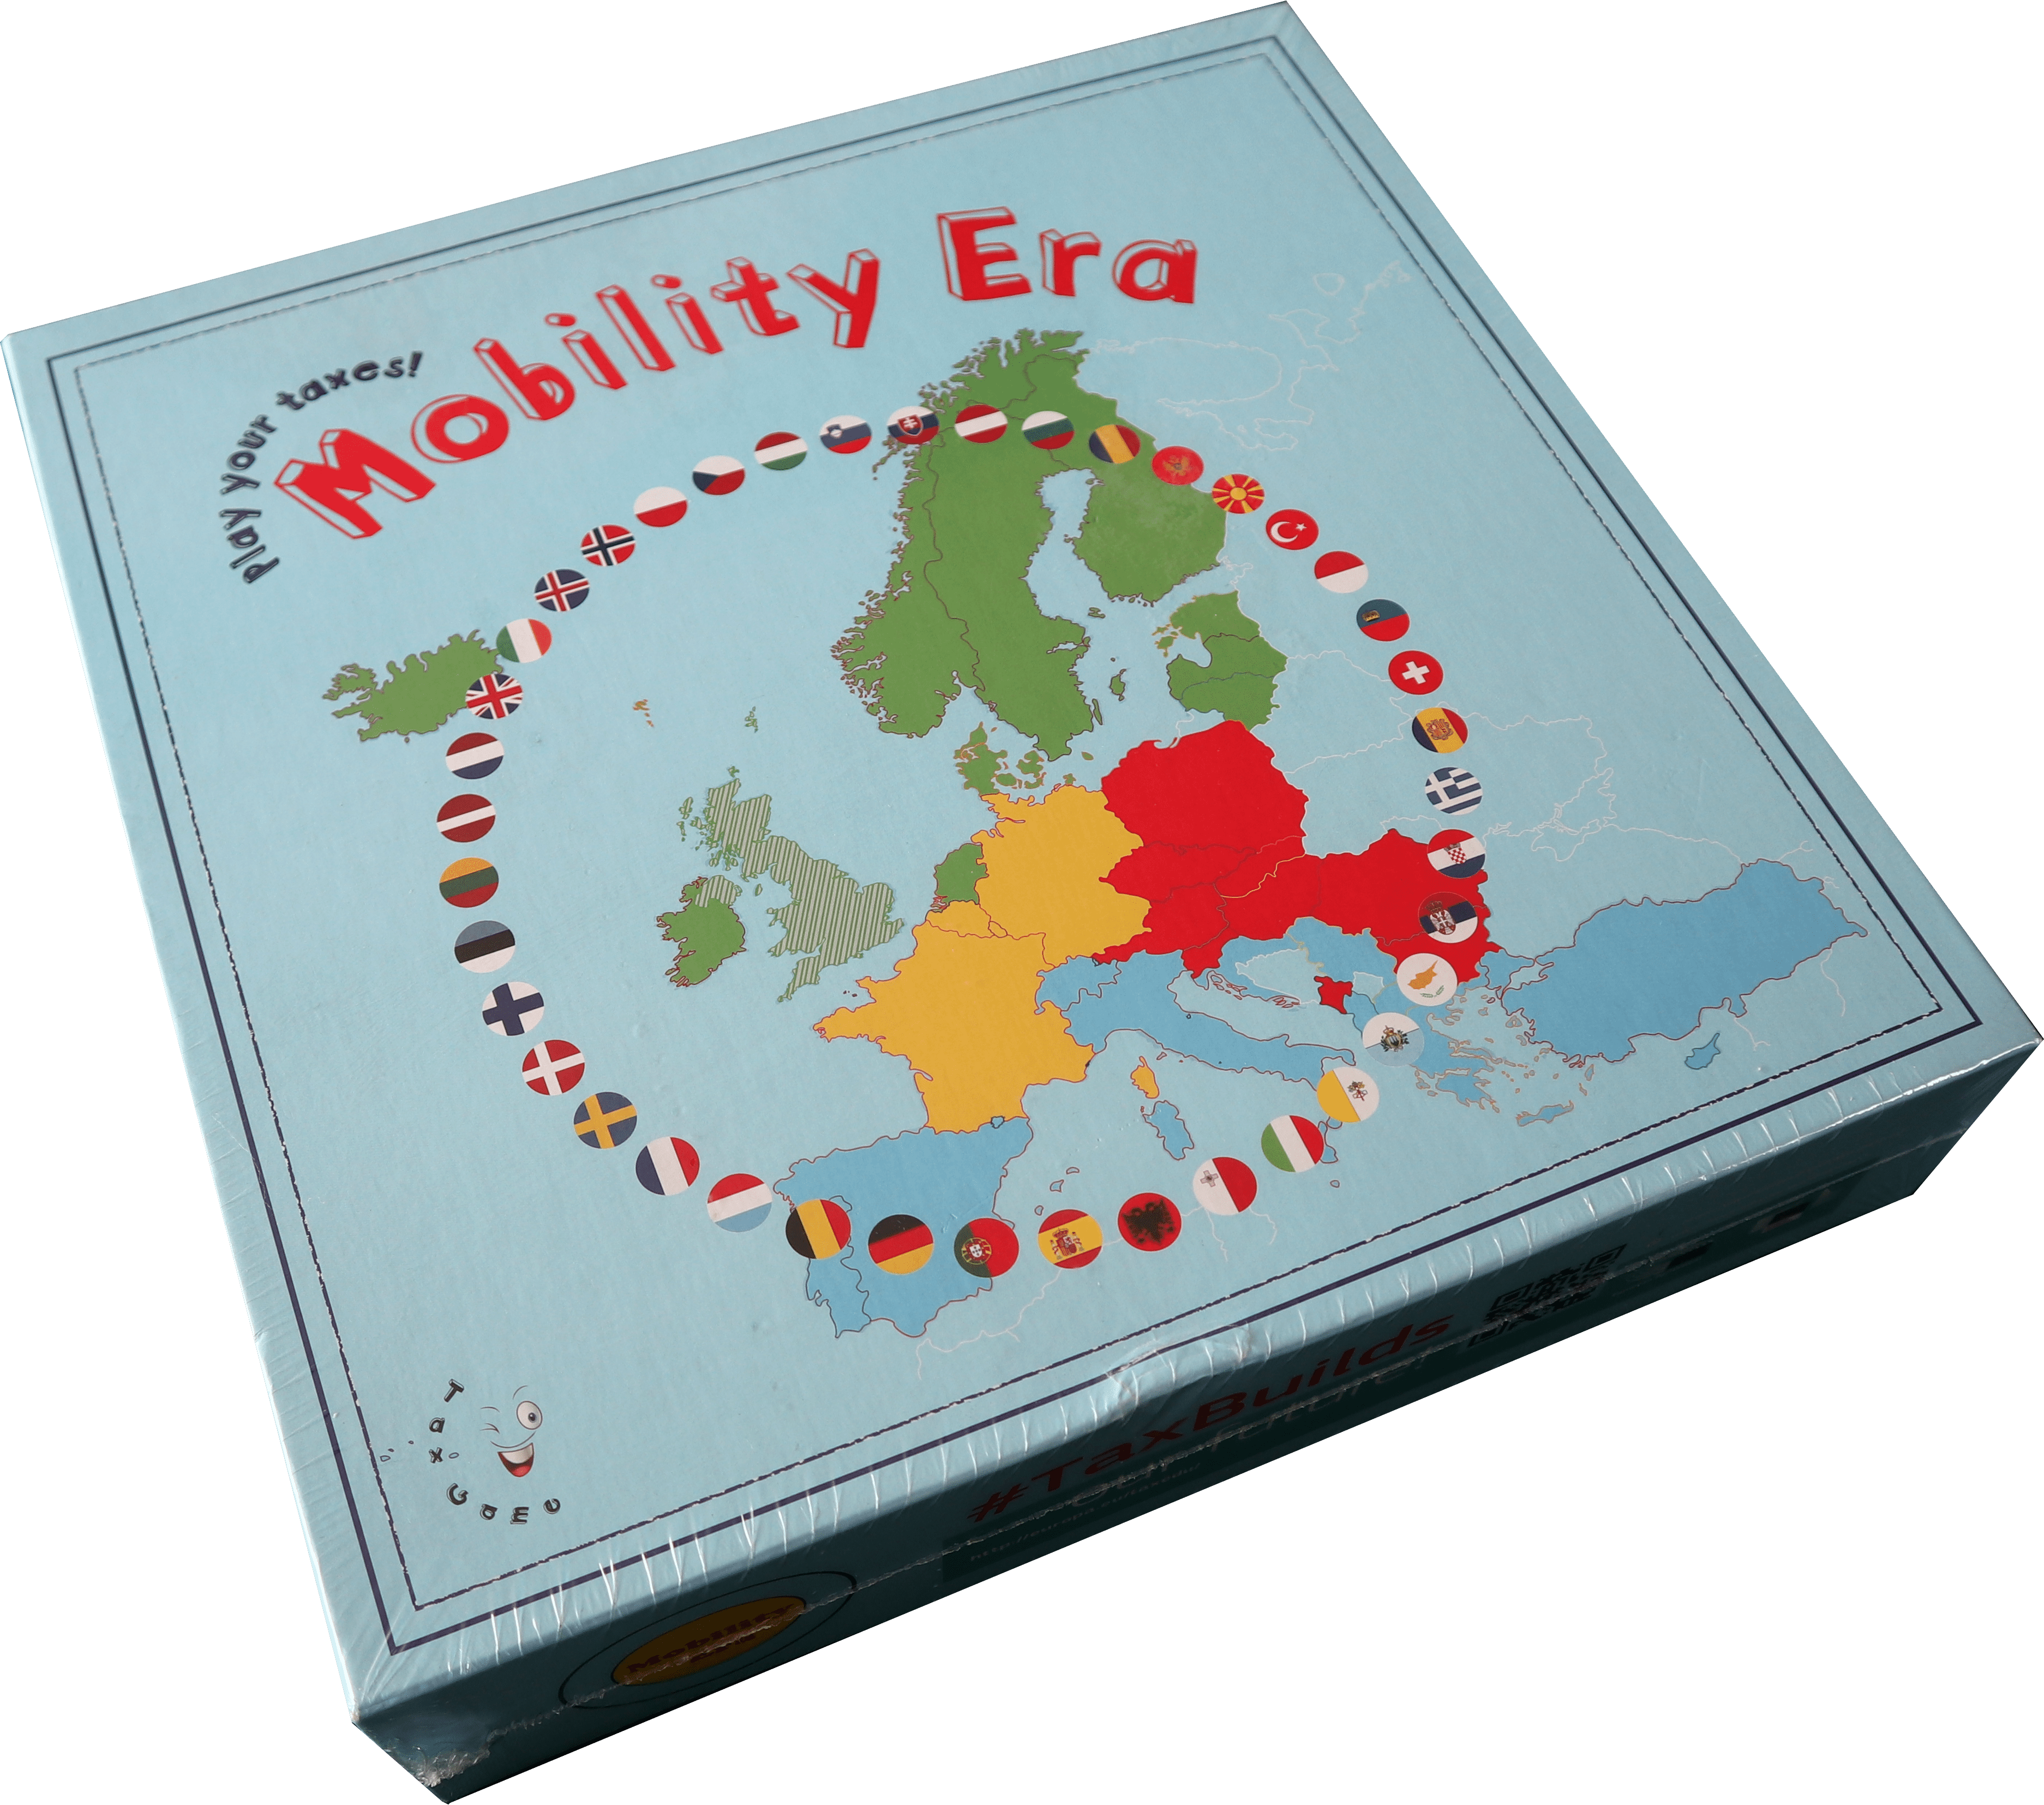 Mobility Era: Play Your Taxes!